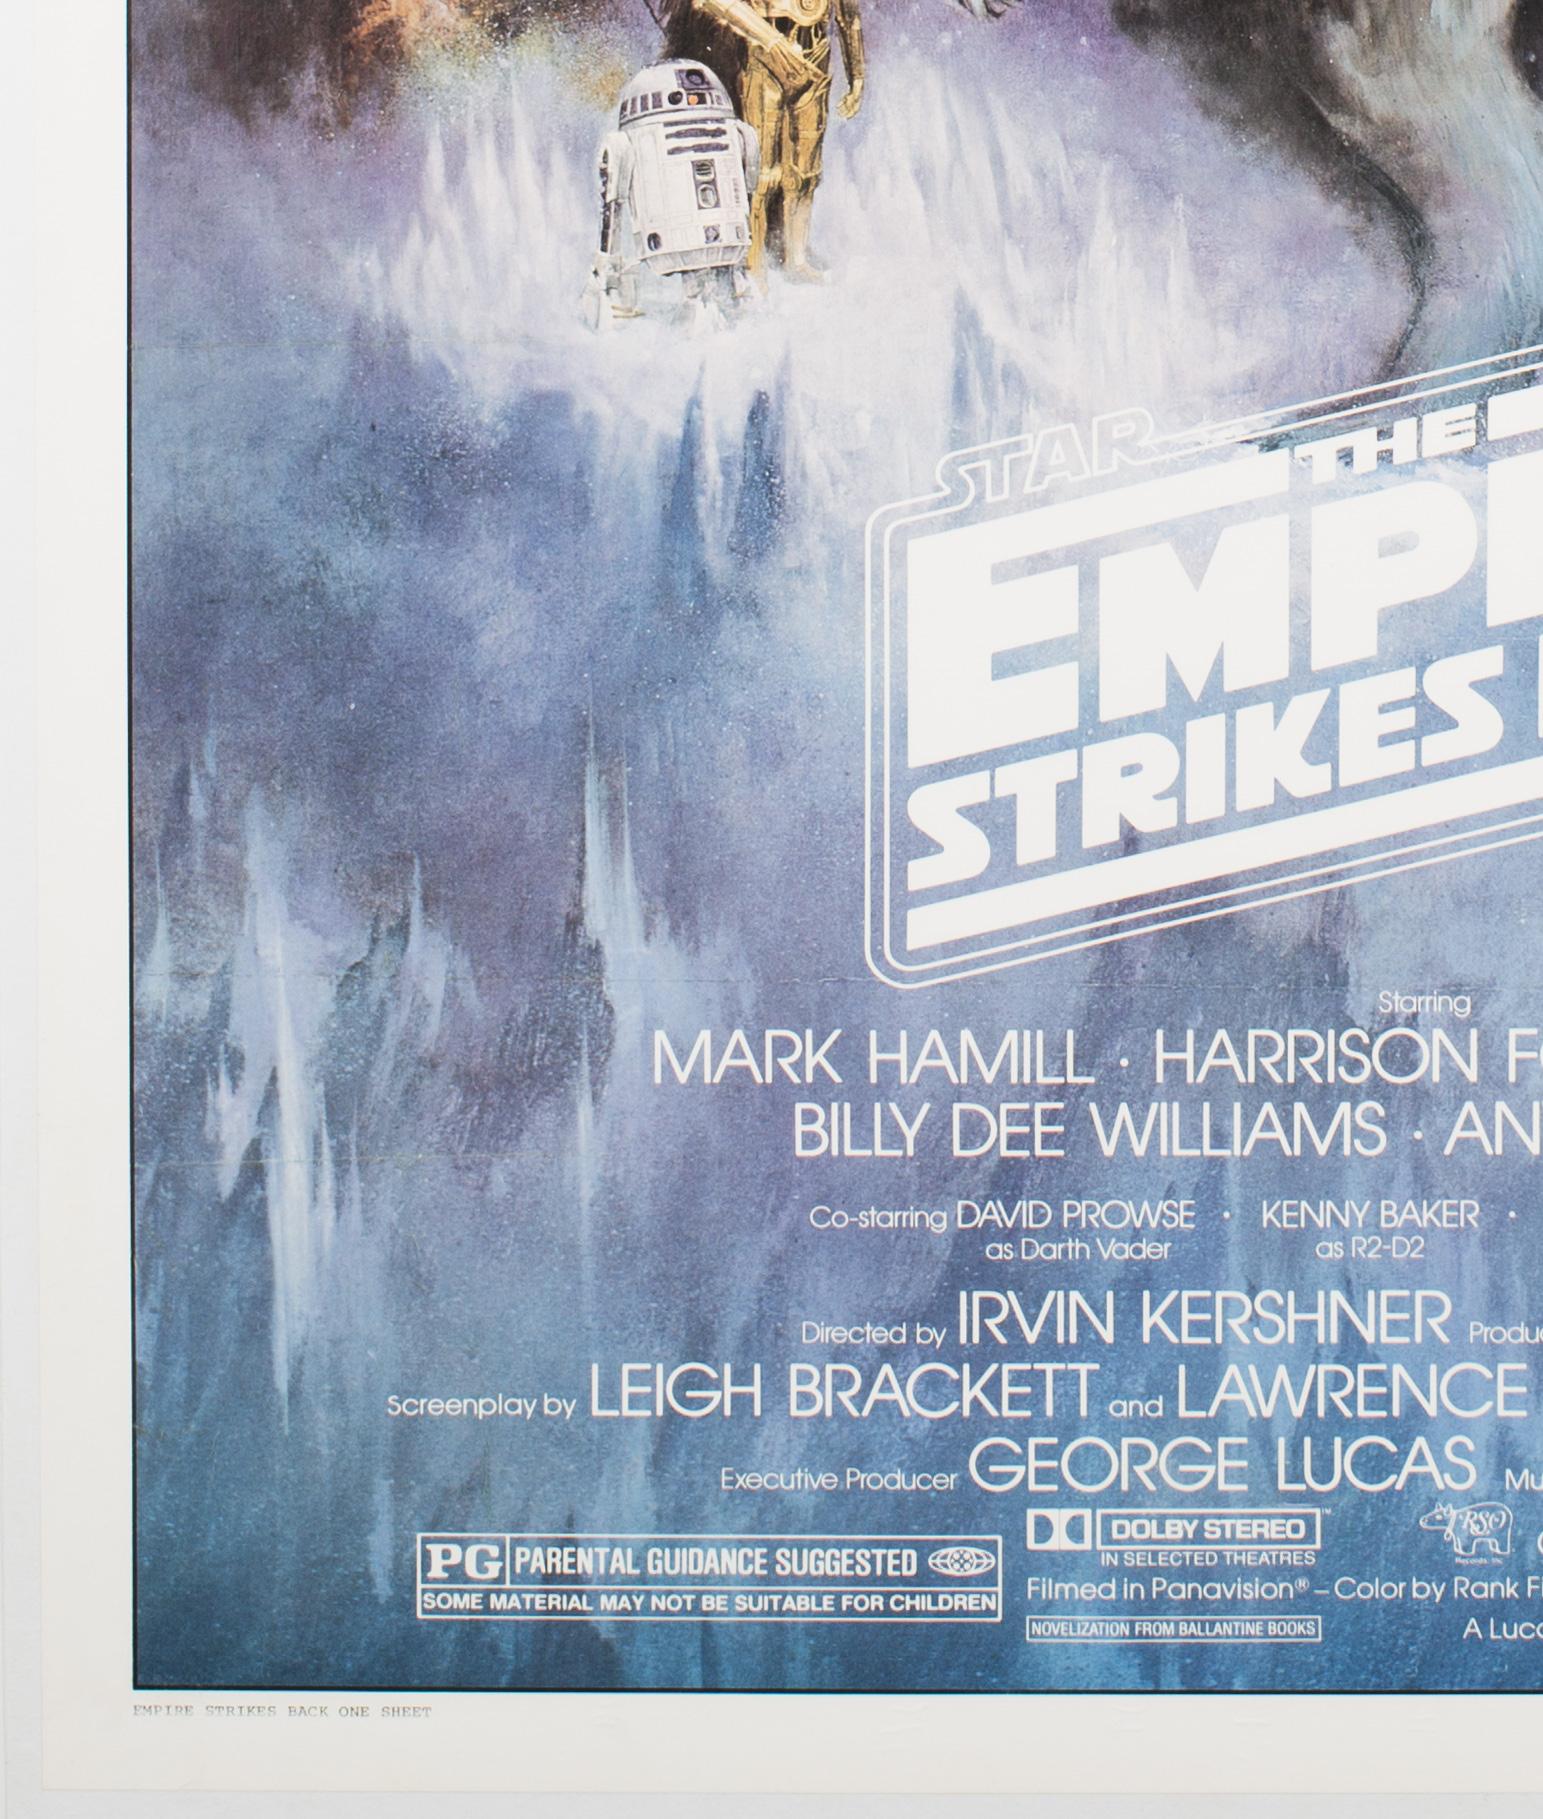 Kastel's beautiful 'Gone With The Wind' design for the movie The Empire Strikes Back style US 1 Sheet Style A poster. Scarce as it was recalled due to Billy Dee Williams being omitted from the poster. 

Professionally cleaned, de-acidified and